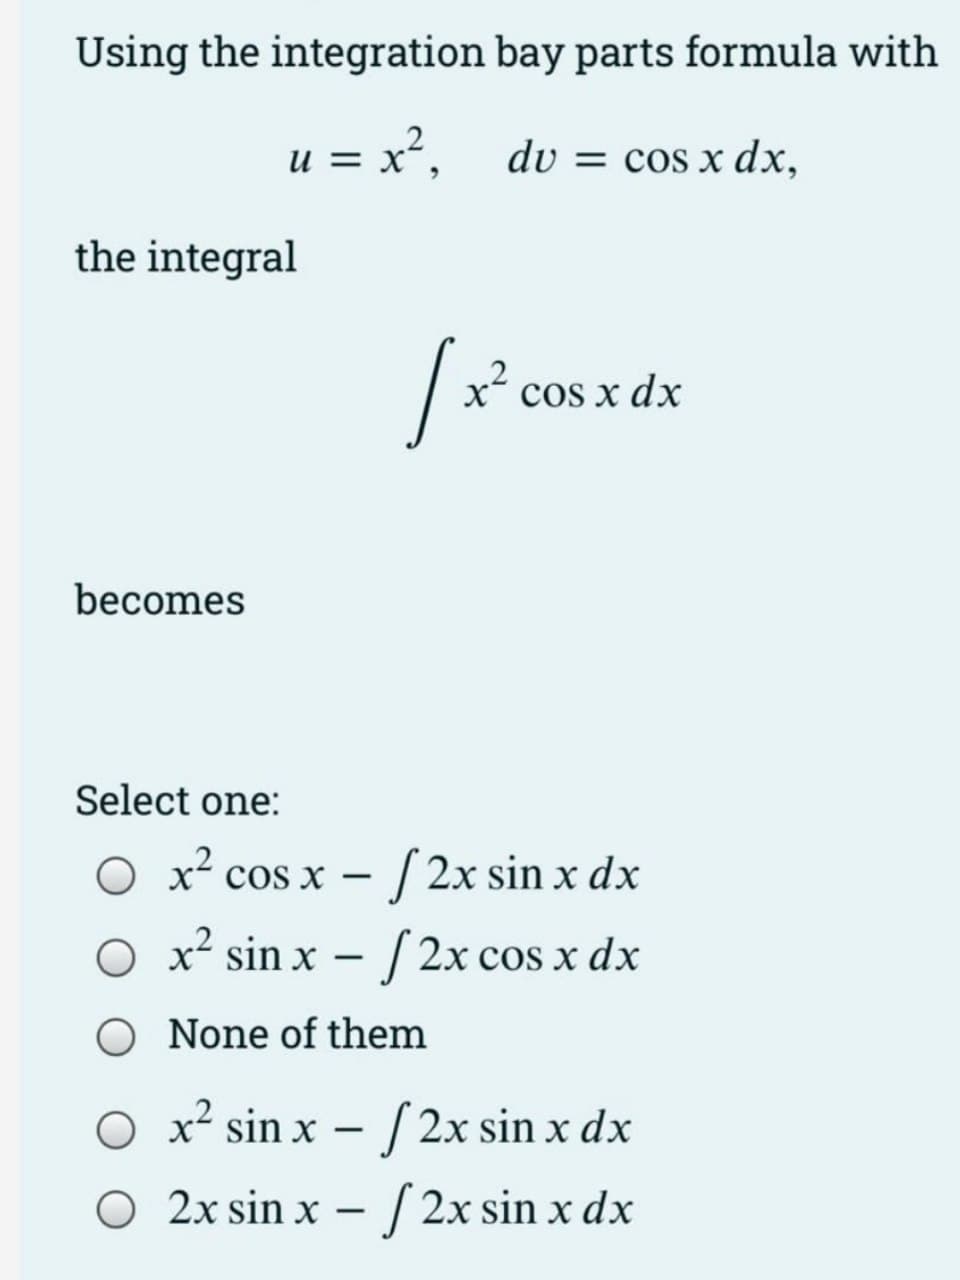 Using the integration bay parts formula with
u = x²,
dv = cos x dx,
the integral
cos x dx
becomes
Select one:
- [ 2x sin x dx
O x² sin x – / 2x cos x dx
O x² cos x
|
-
O None of them
O x² sin x – [ 2x sin x dx
O 2x sin x – 2x sin x dx
